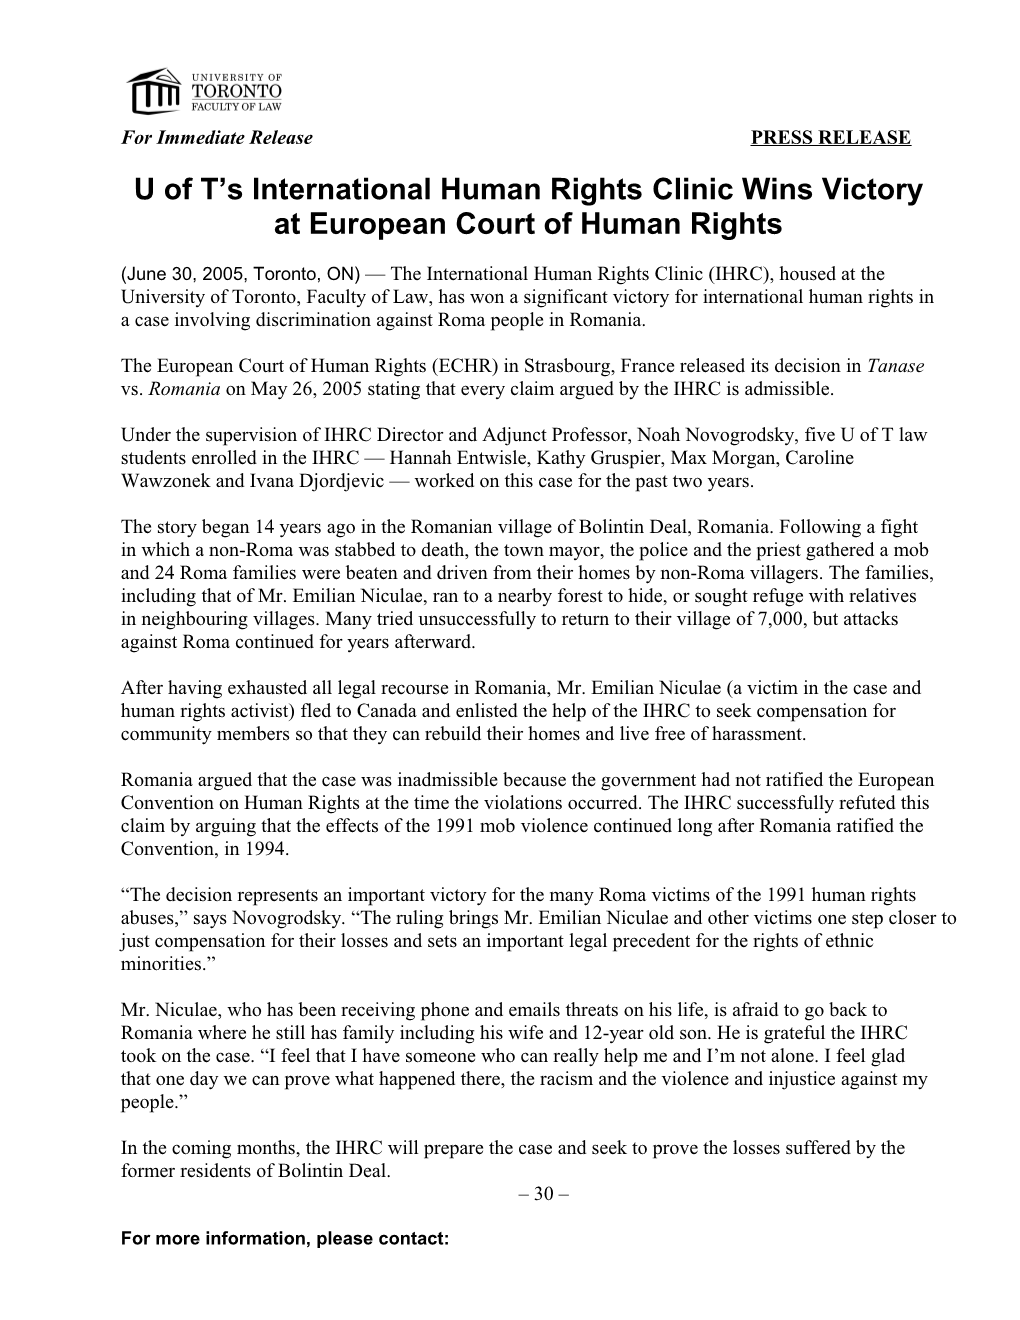 The Faculty of Law S International Human Rights Clinic (IHRC) Has Won an Important Victory